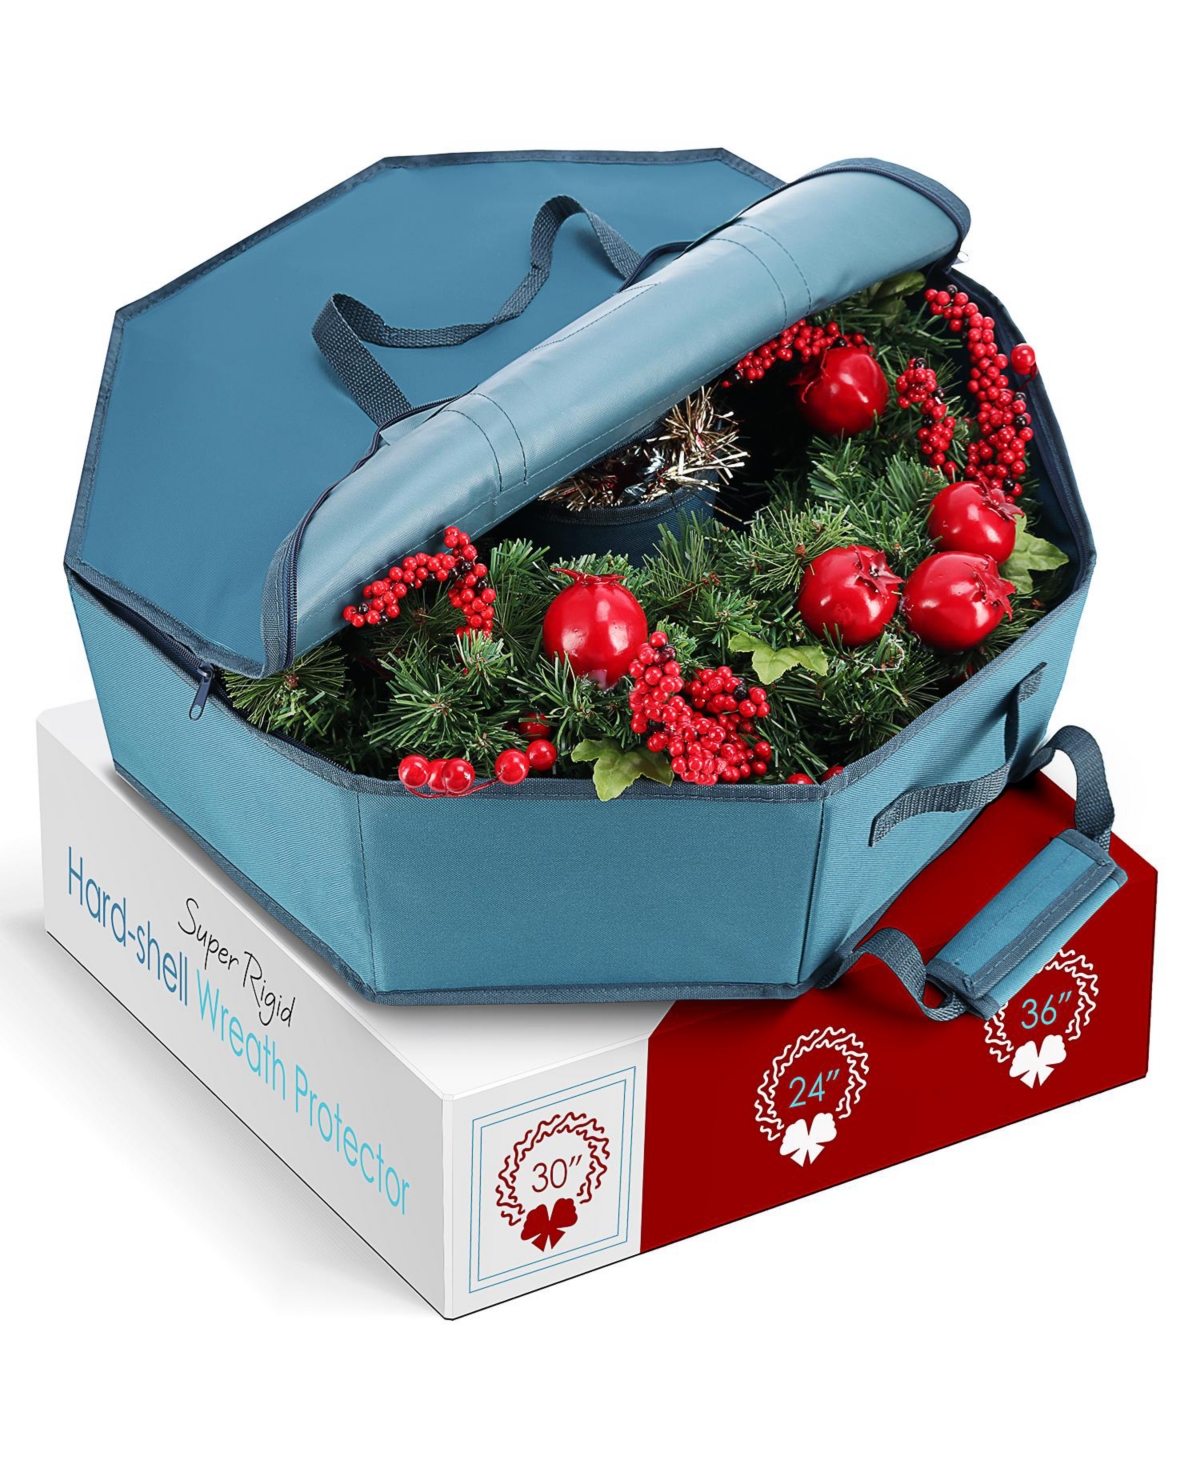 Premium Hard Shell Wreath Storage Bag with Interior Pockets, Dual Zipper and Handles - 30 Inch - Blue